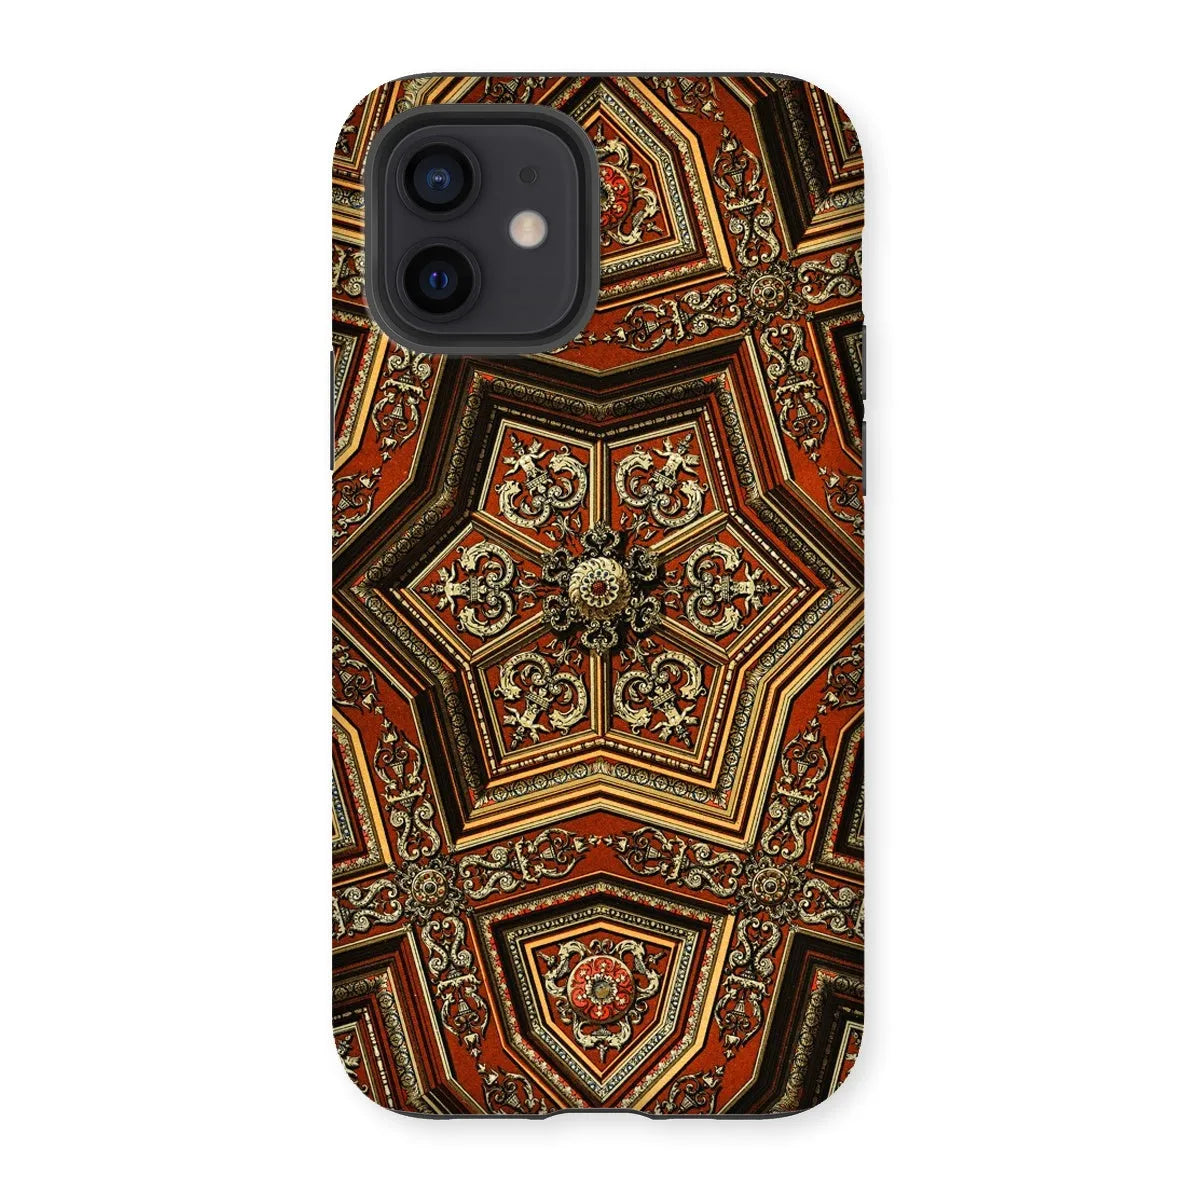 Renaissance Pattern By Auguste Racinet Tough Phone Case - Iphone 12 / Gloss - Mobile Phone Cases - Aesthetic Art